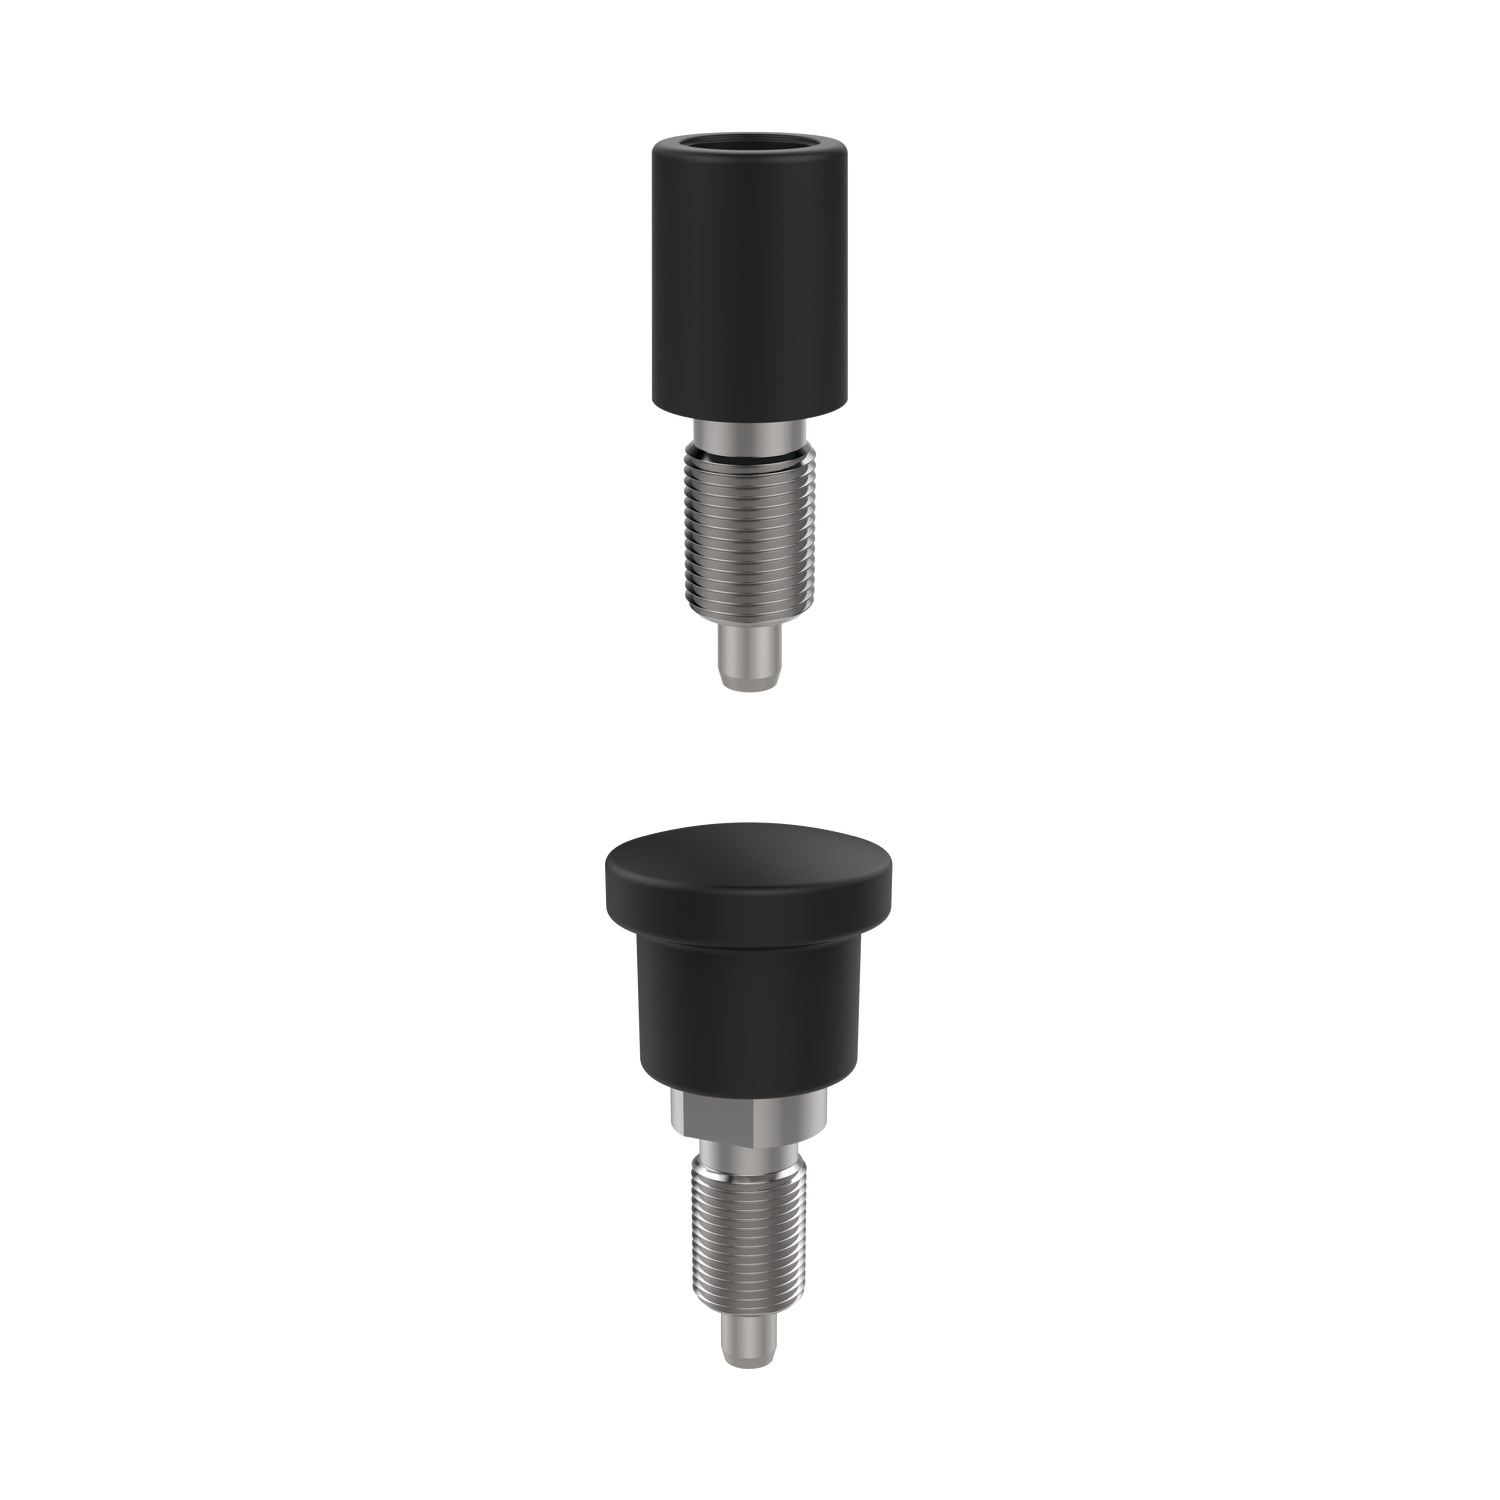 Product 32782, Index plungers - Pull Grip locking - tamper resistant - pin retracted at start / 